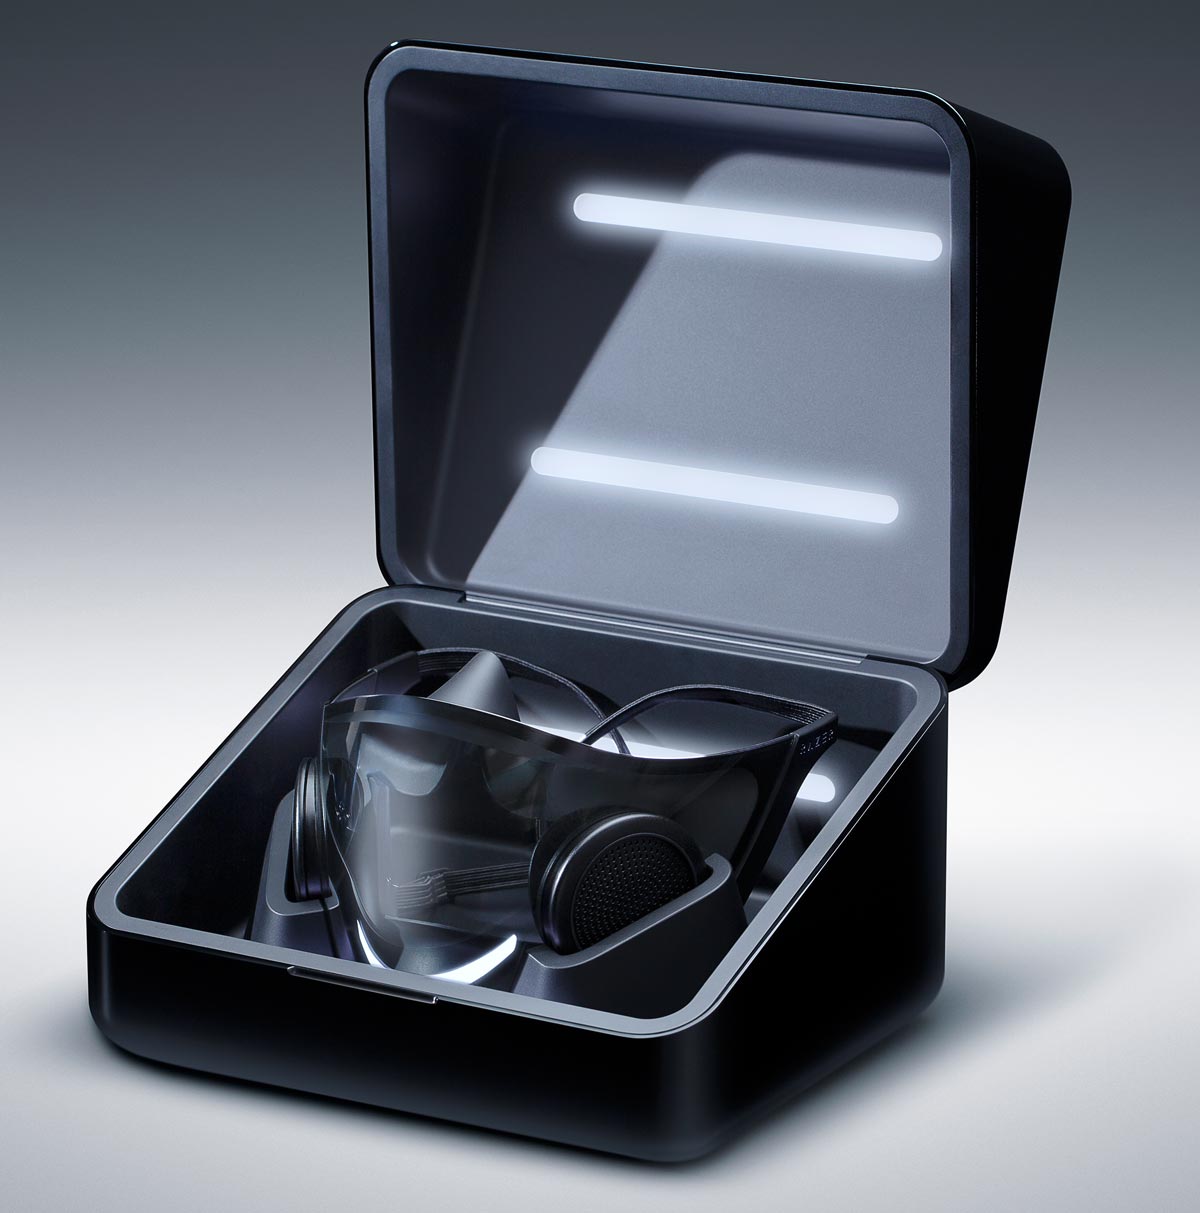 The Razer Project Hazel face mask in its charging/sanitizing case